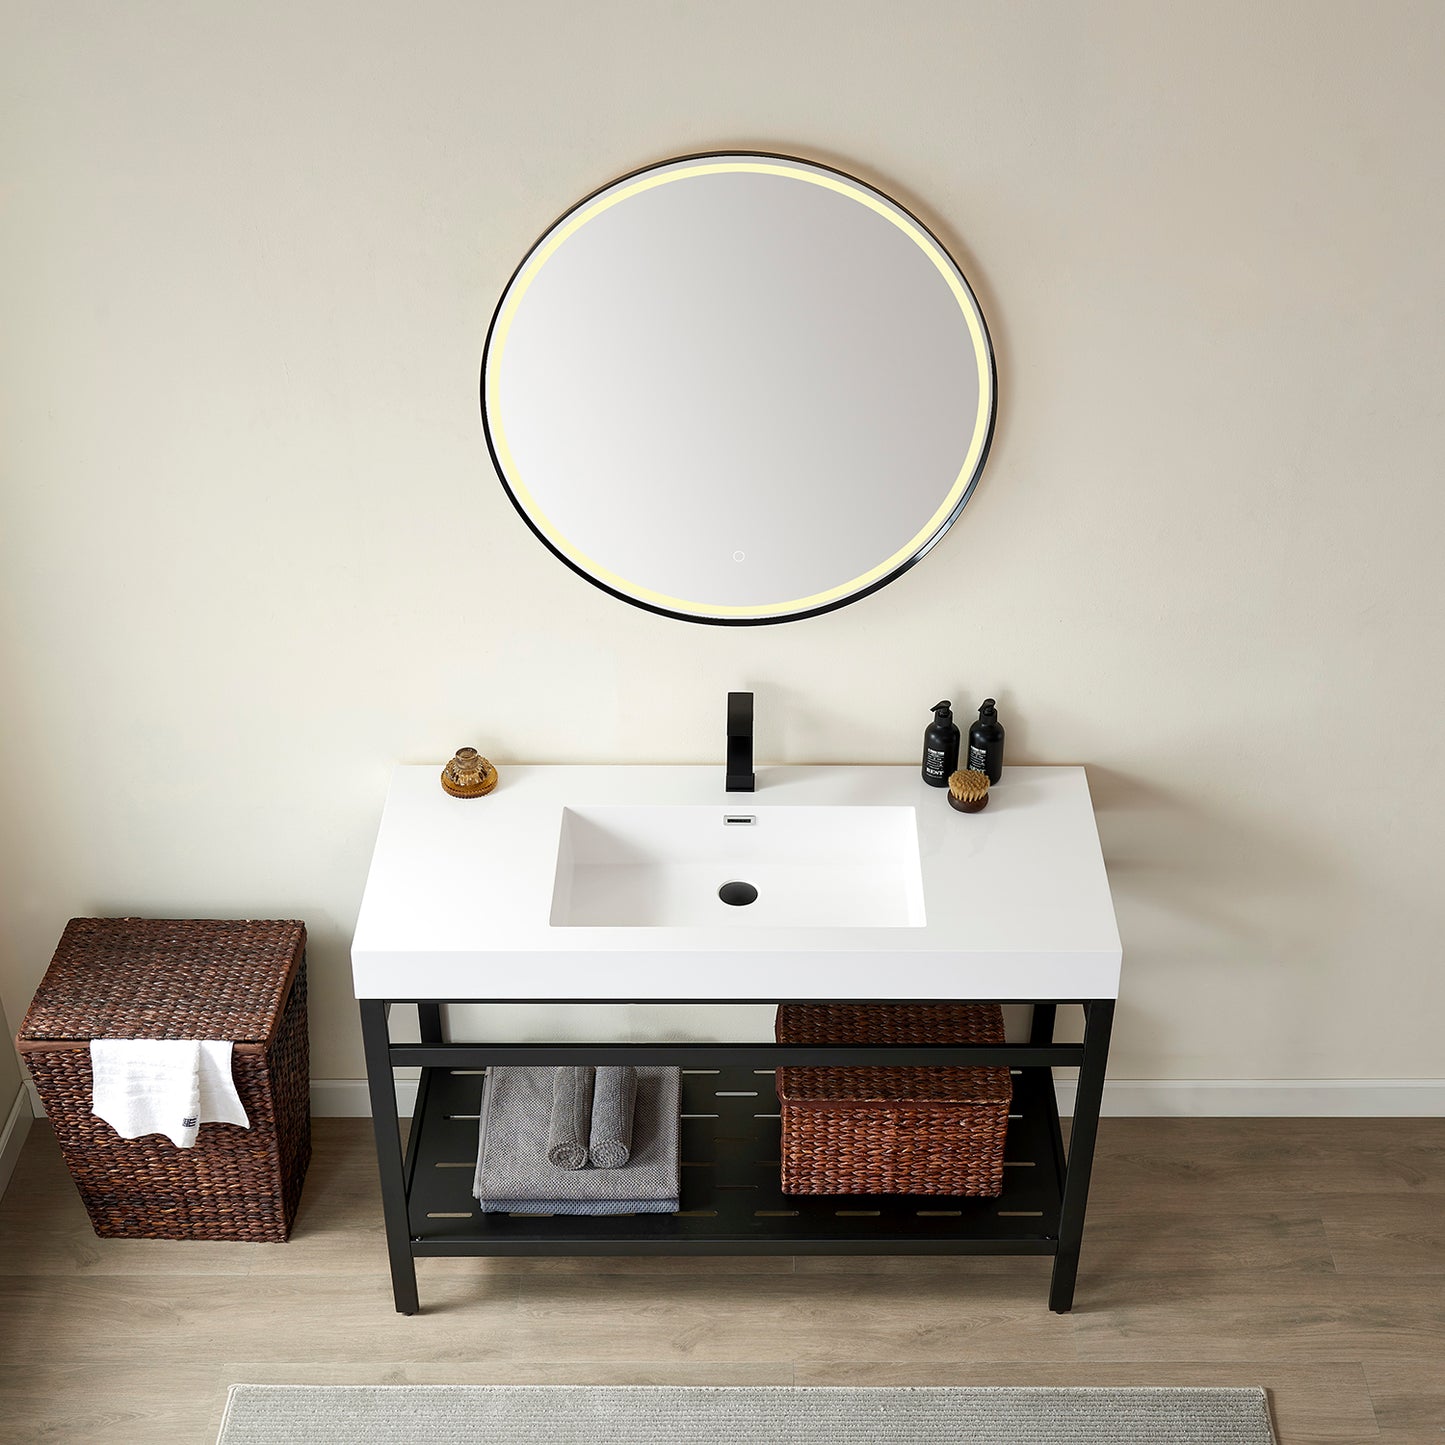 Ablitas Single Sink Bath Vanity with Black/White/Grey One-Piece Composite Stone Sink Top and Optional Mirror